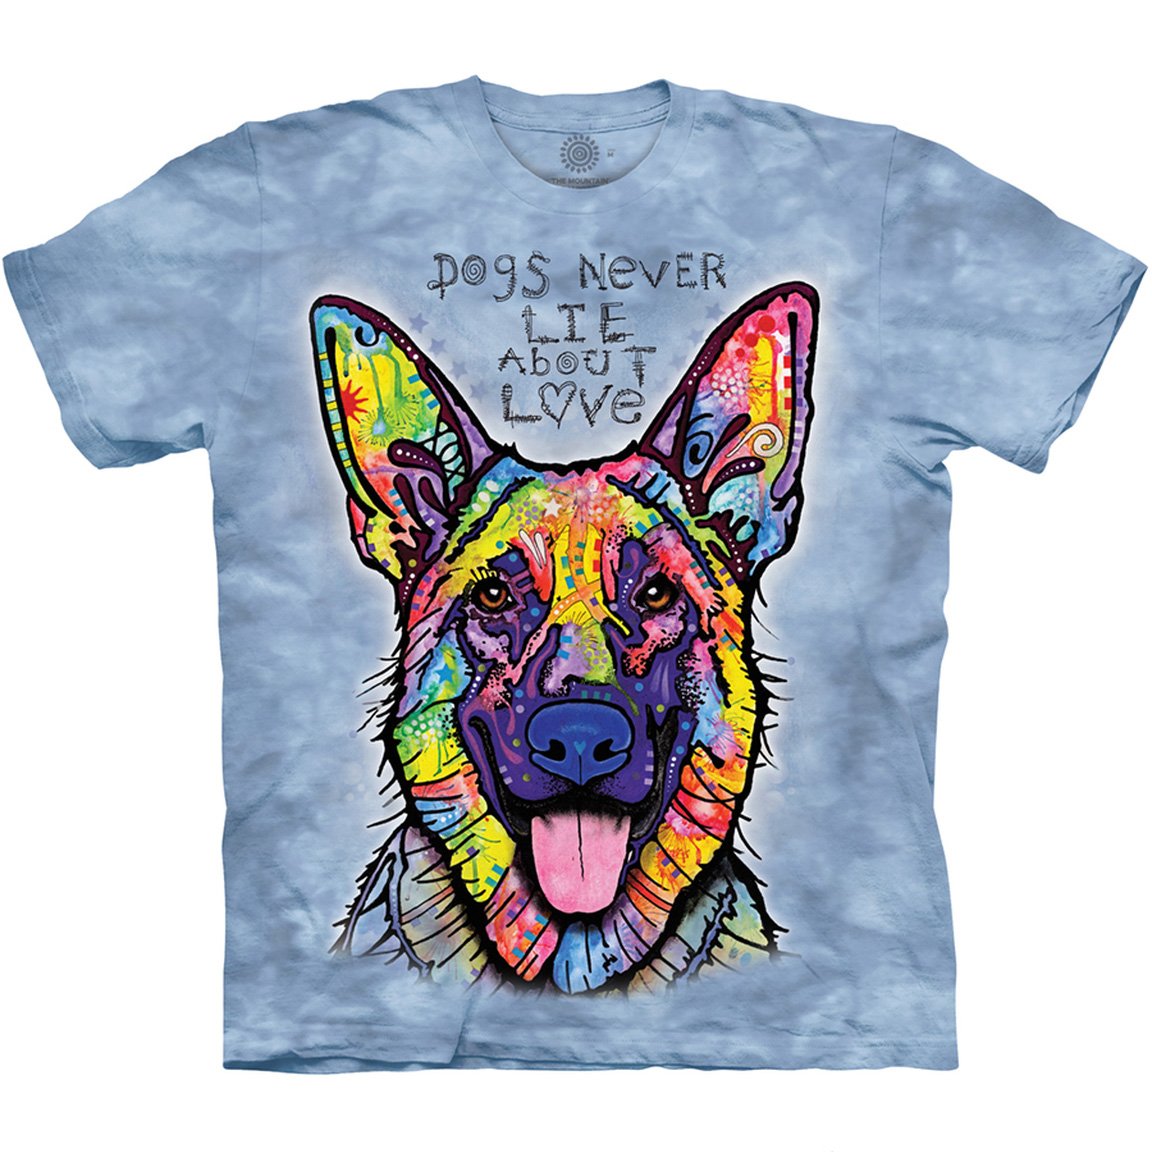 The Mountain Dogs Never Lie - T-Shirt